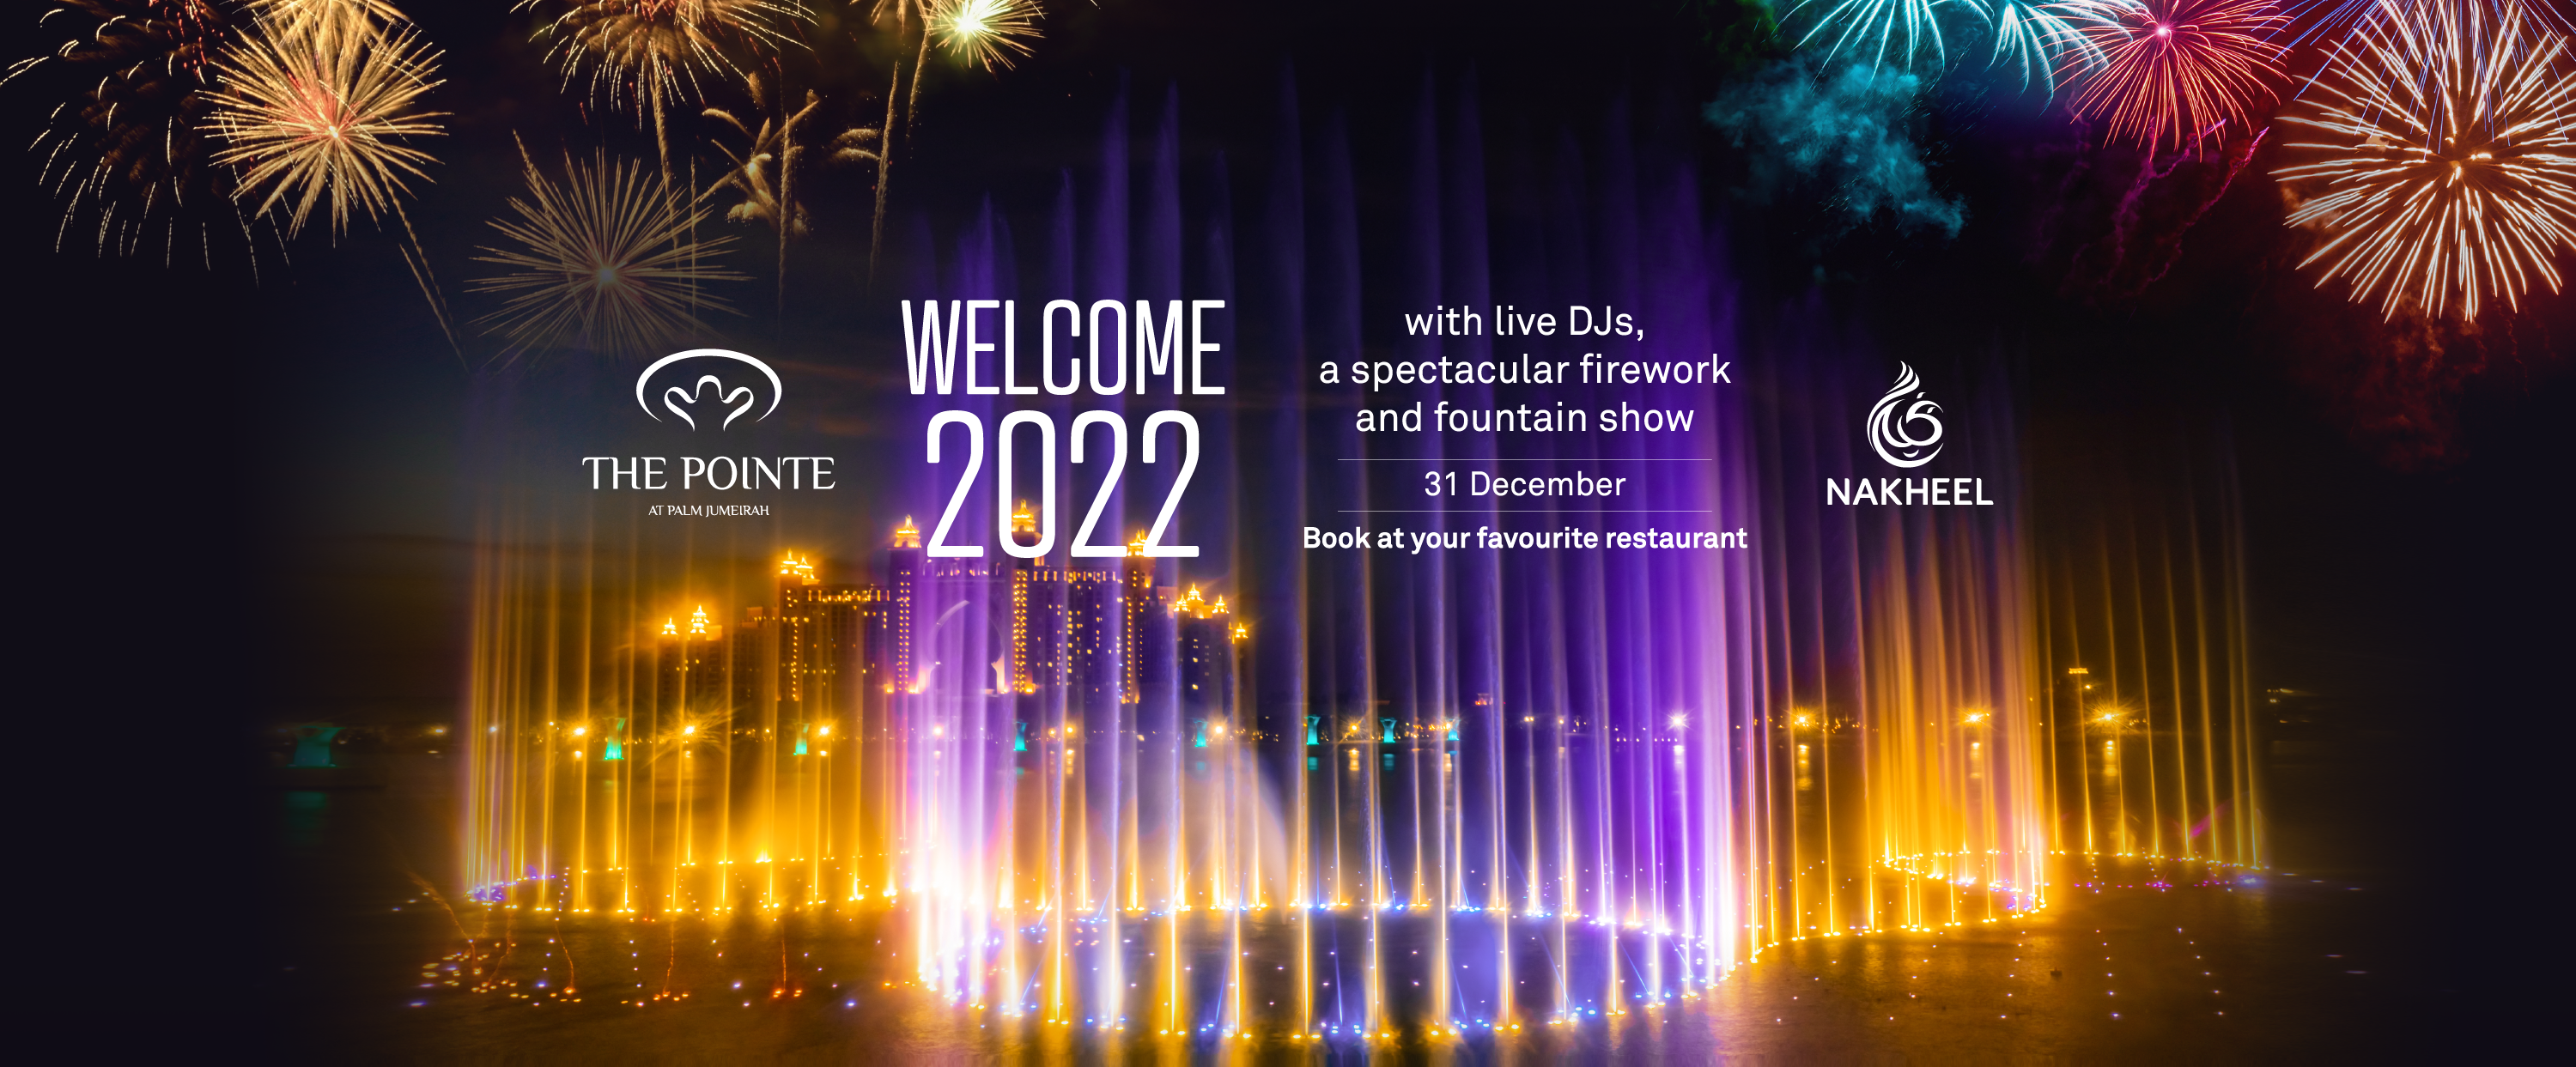 Explore new year offers at The Pointe